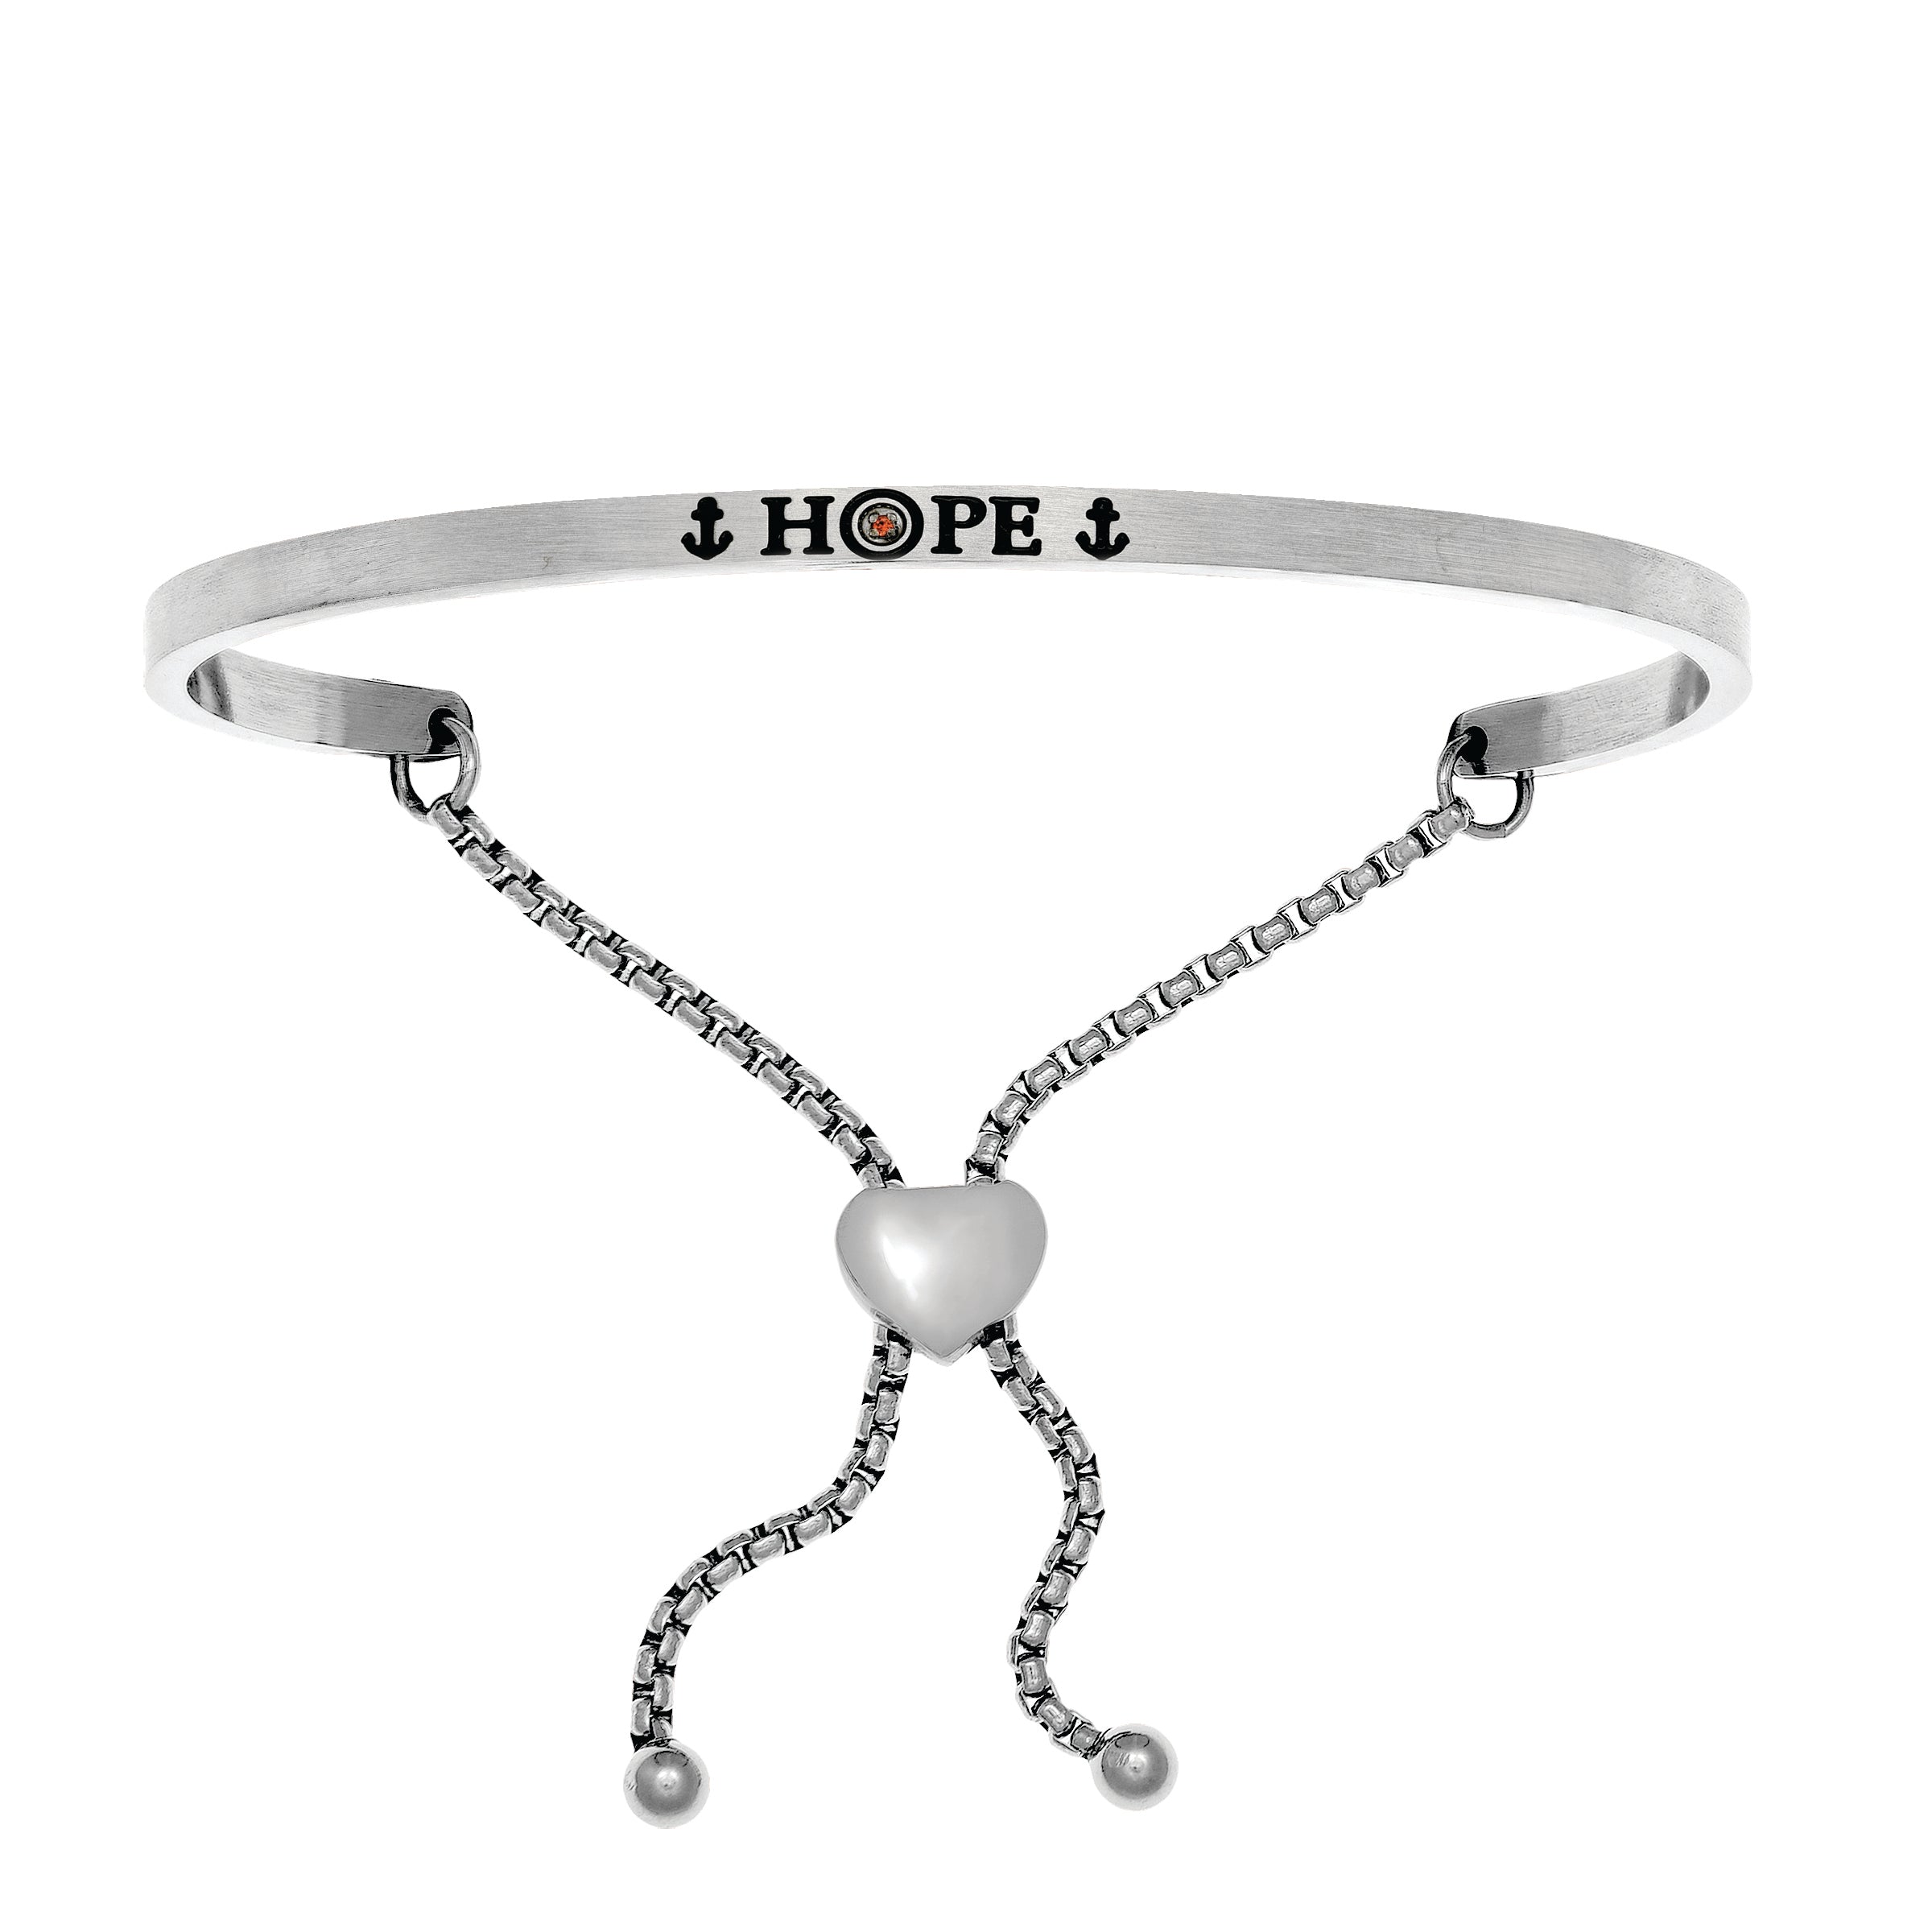 Intuitions Stainless Steel Satin Square Hope With Anchors Bangle Bracelet fine designer jewelry for men and women